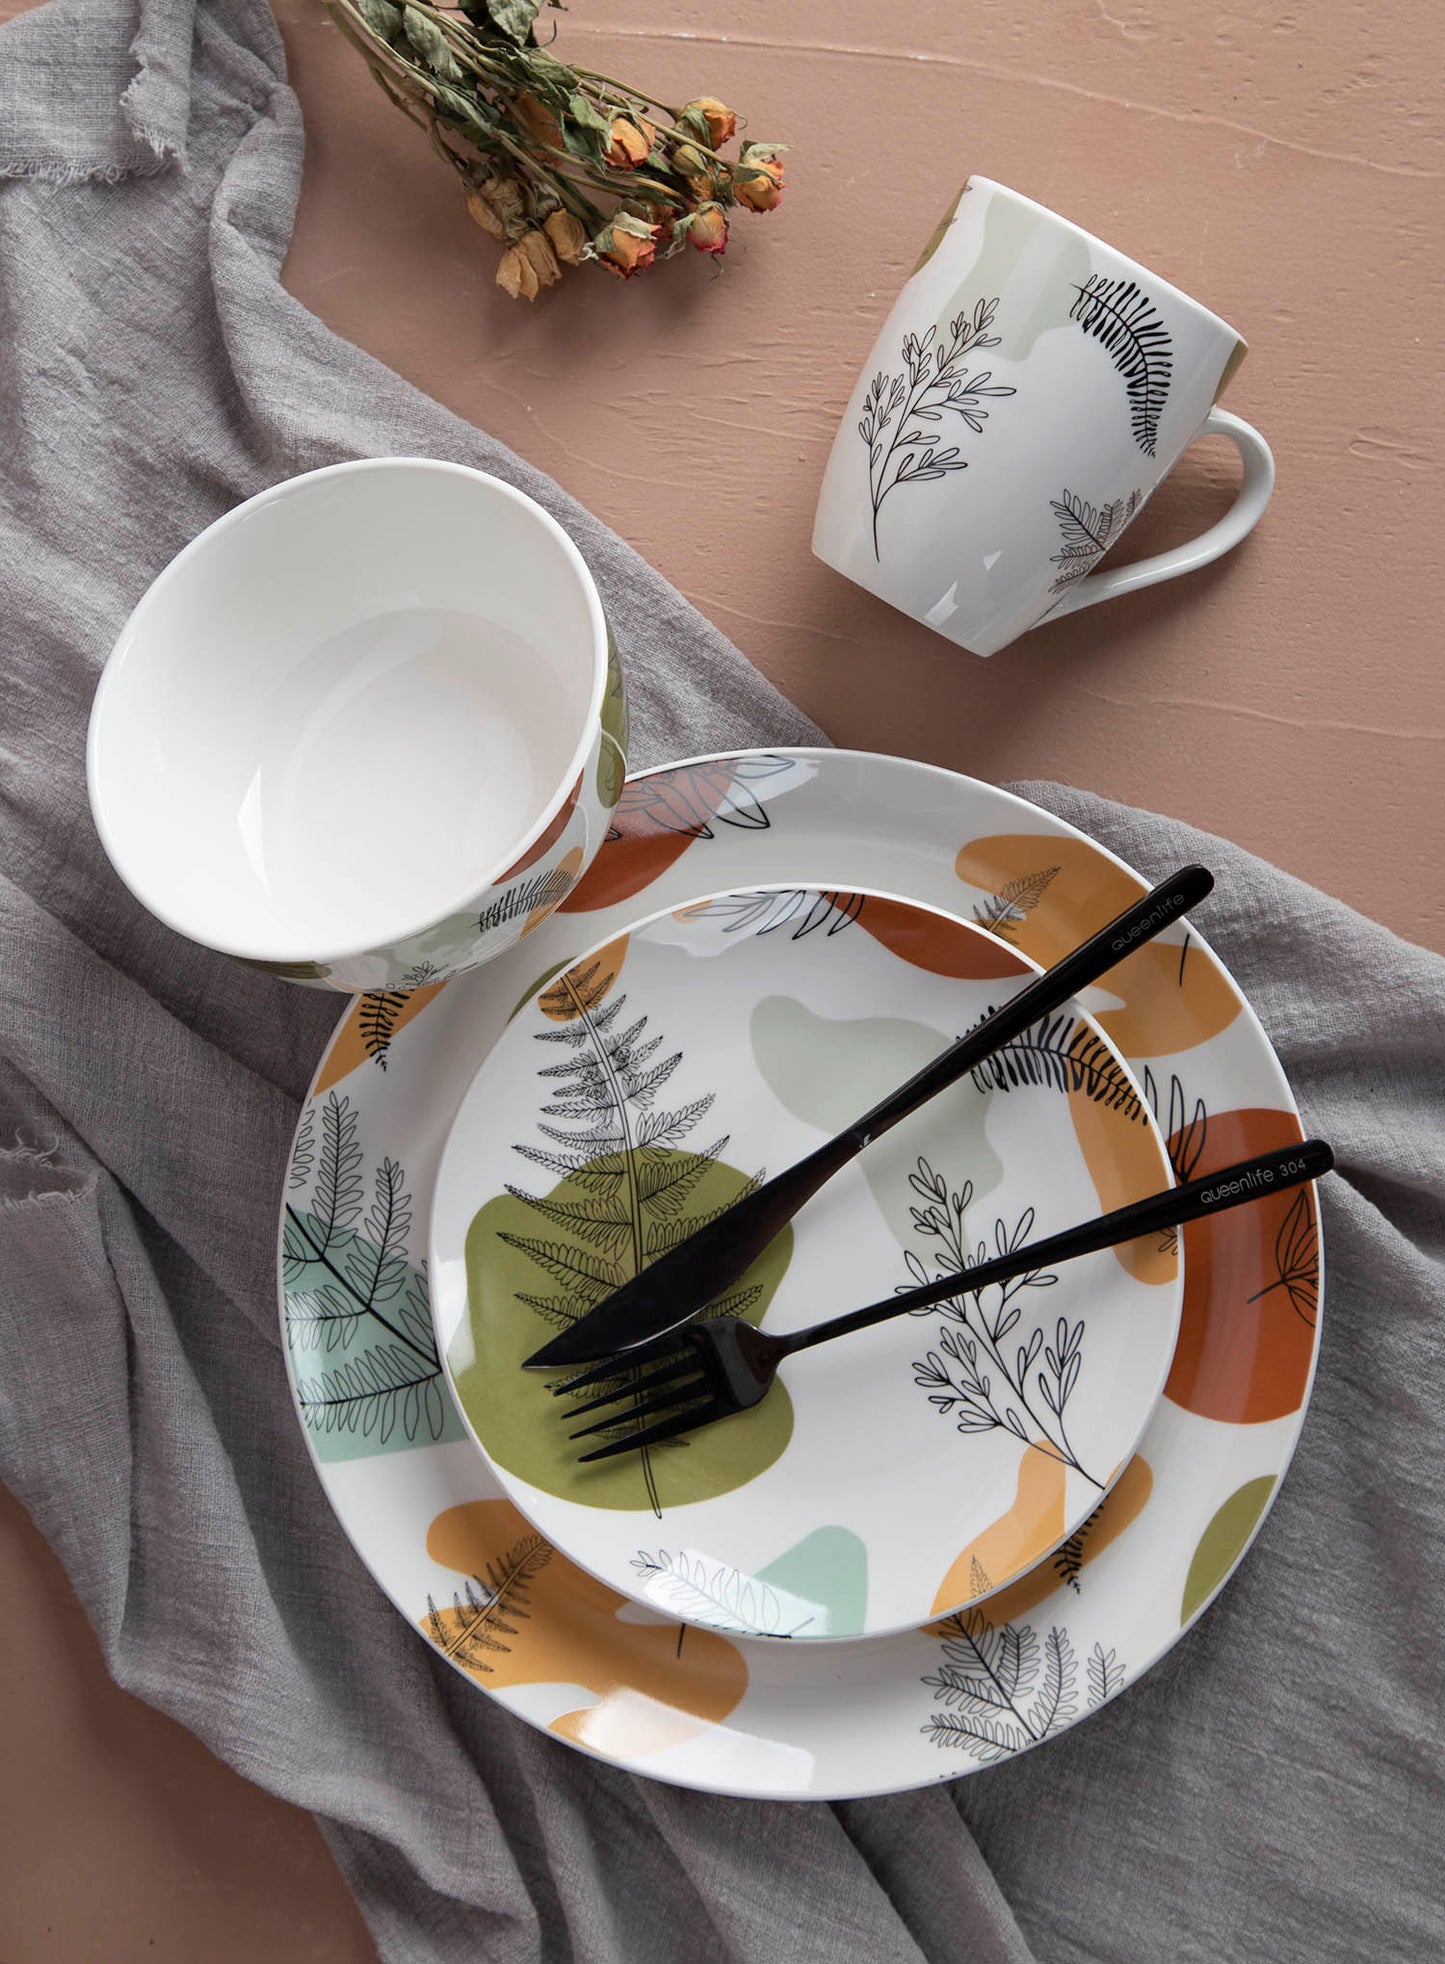 Four Seasons Abstract Plant Pattern Decal Plate Bowl Cup Porcelain Tableware | Item NO.: 96C-029